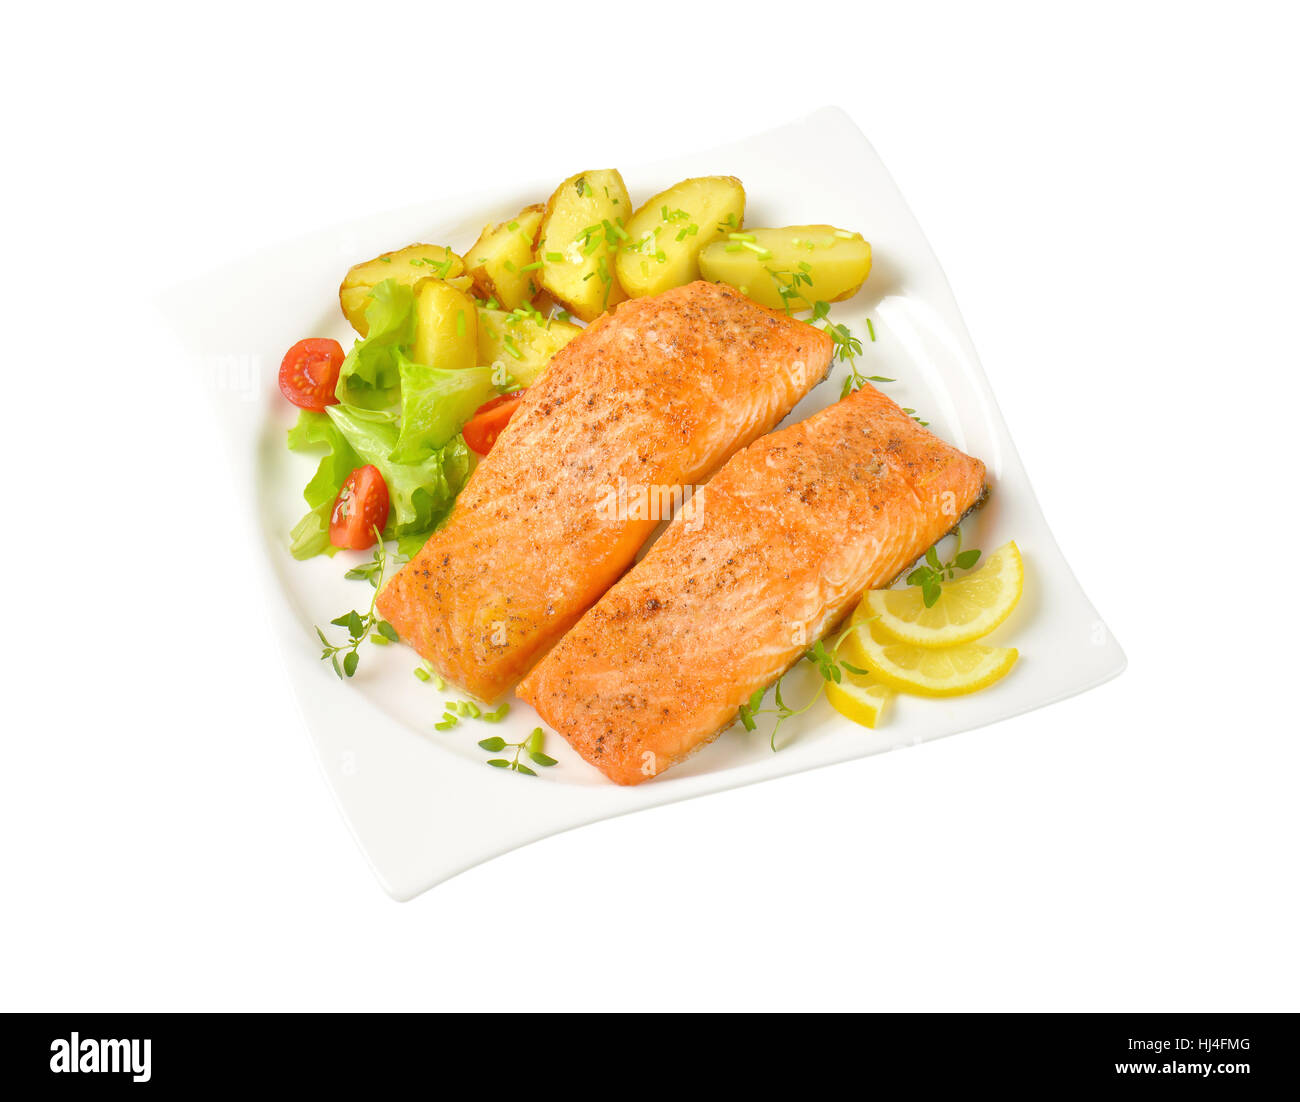 salmon fillets with roasted potatoes and vegetable garnish on square plate Stock Photo